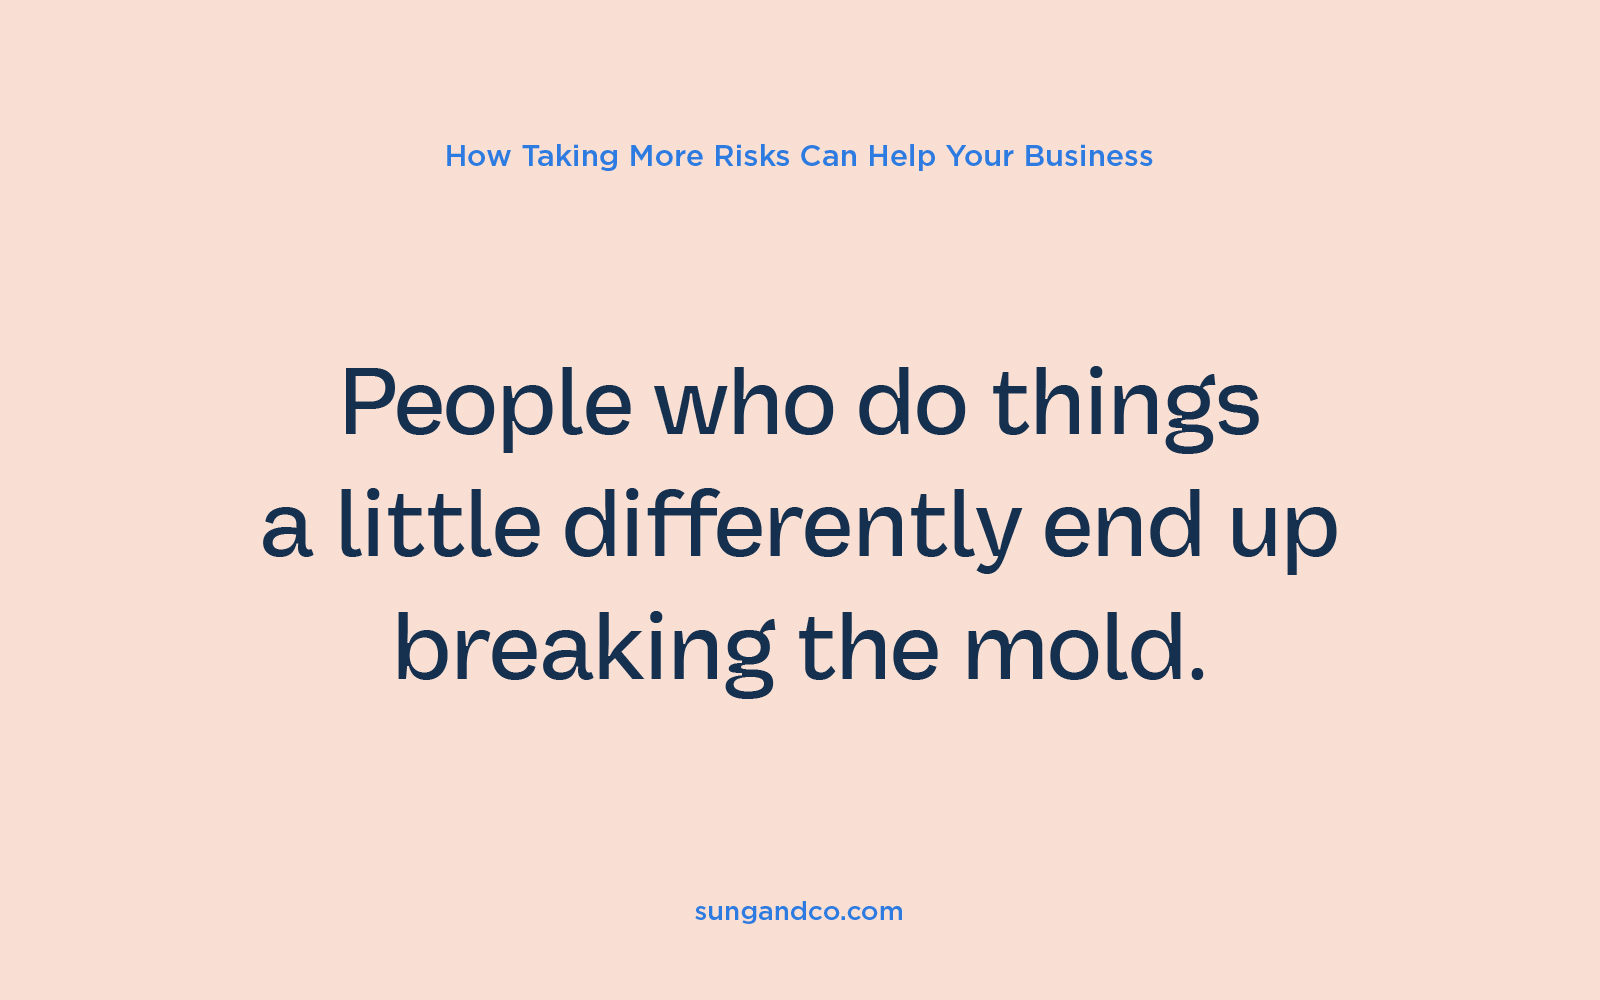 People who do things a little differently end up breaking the mold – text graphic